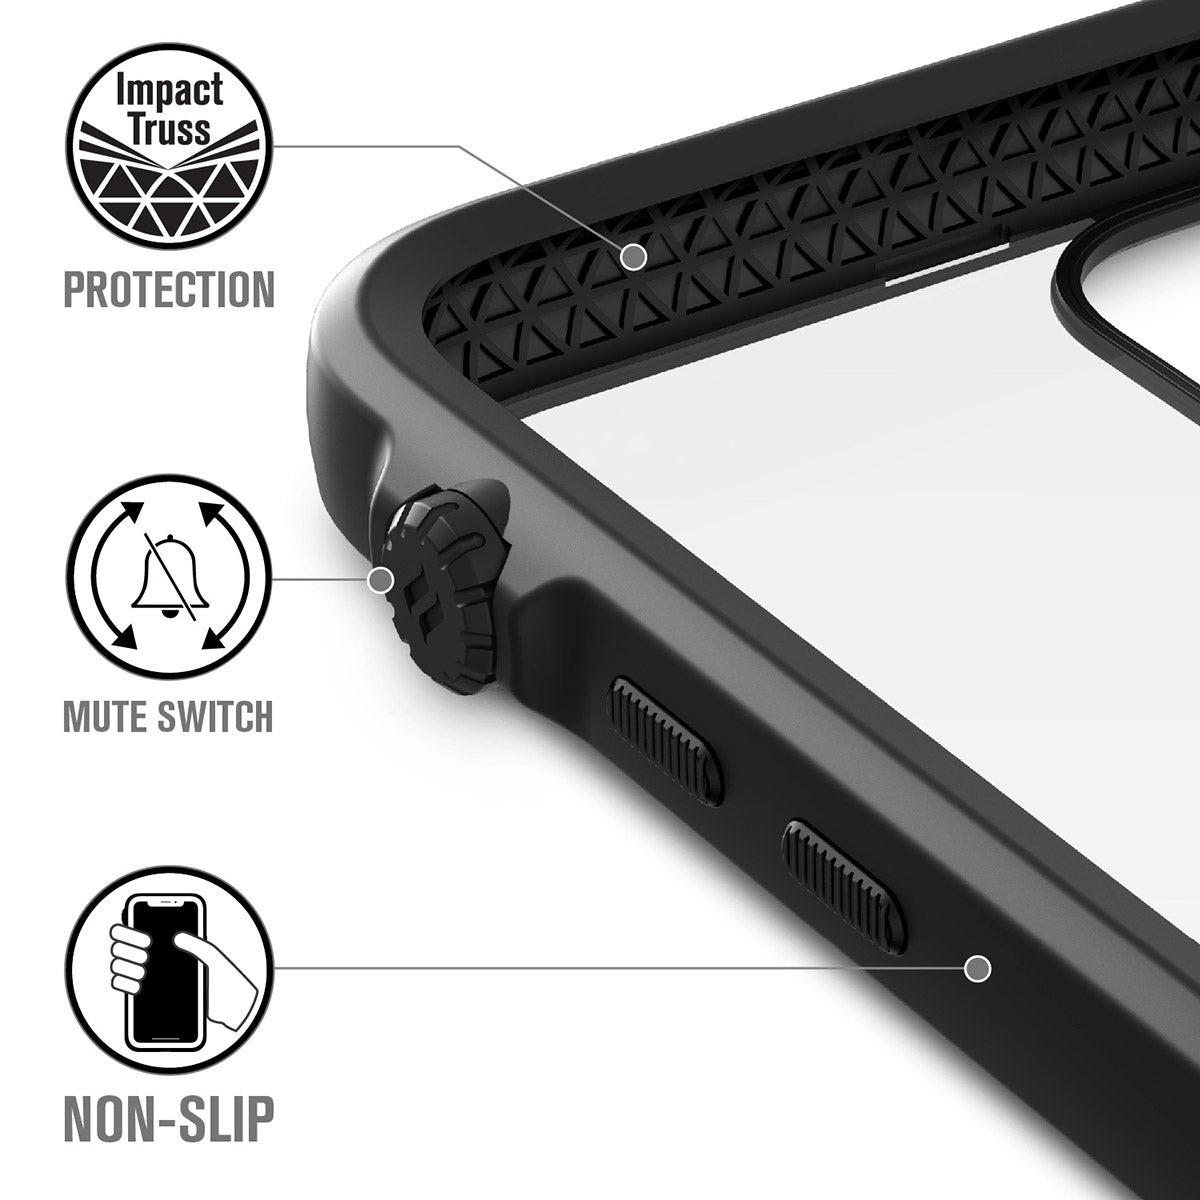 catalyst iPhone 11 series impact protection case black showing the impact truss mute switch and buttons of the case for iPhone 11 pro text reads impact truss protection mute switch non-slip